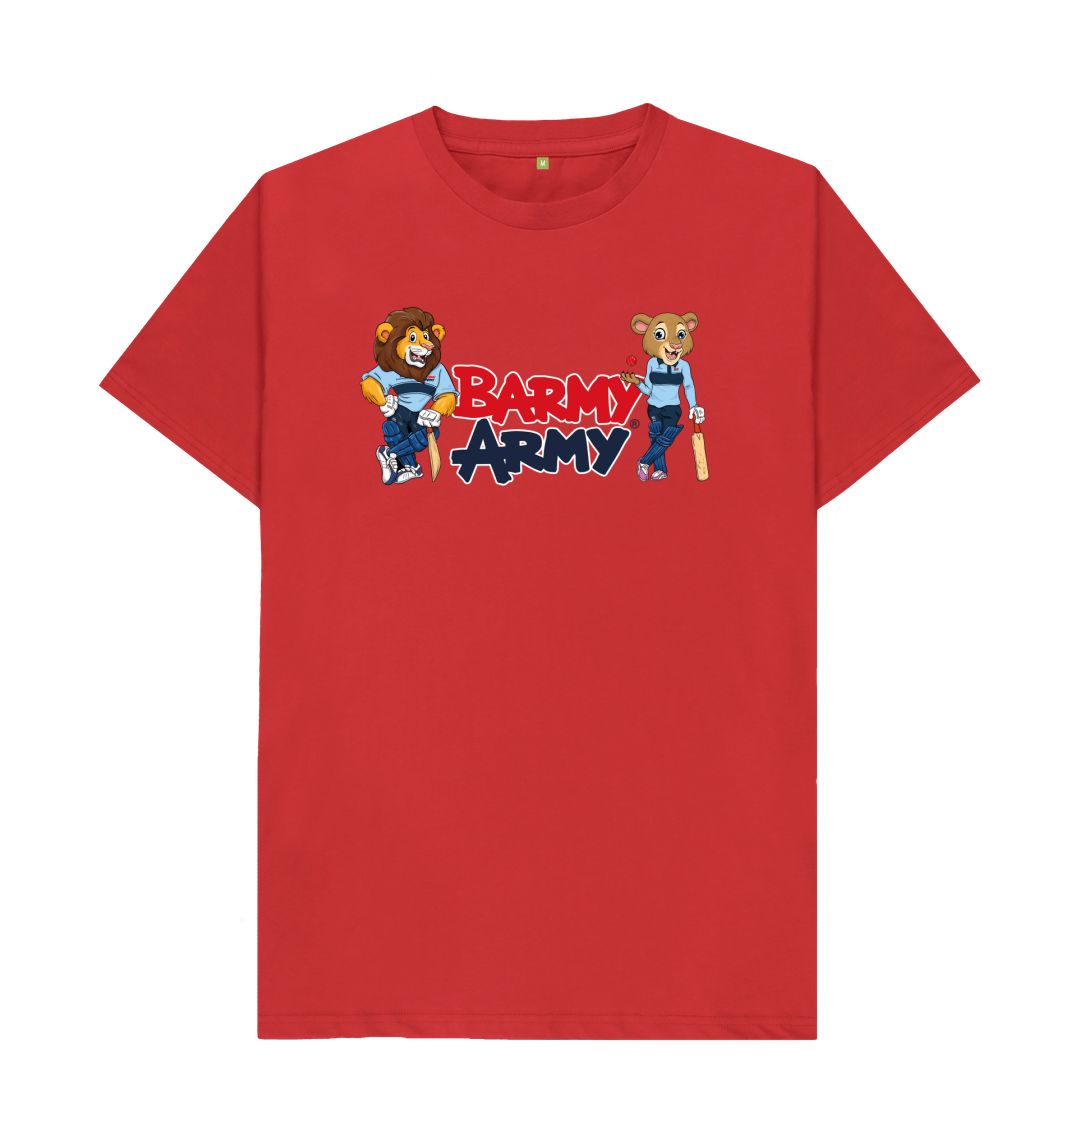 Red Barmy Army Mascots Tee - Men's